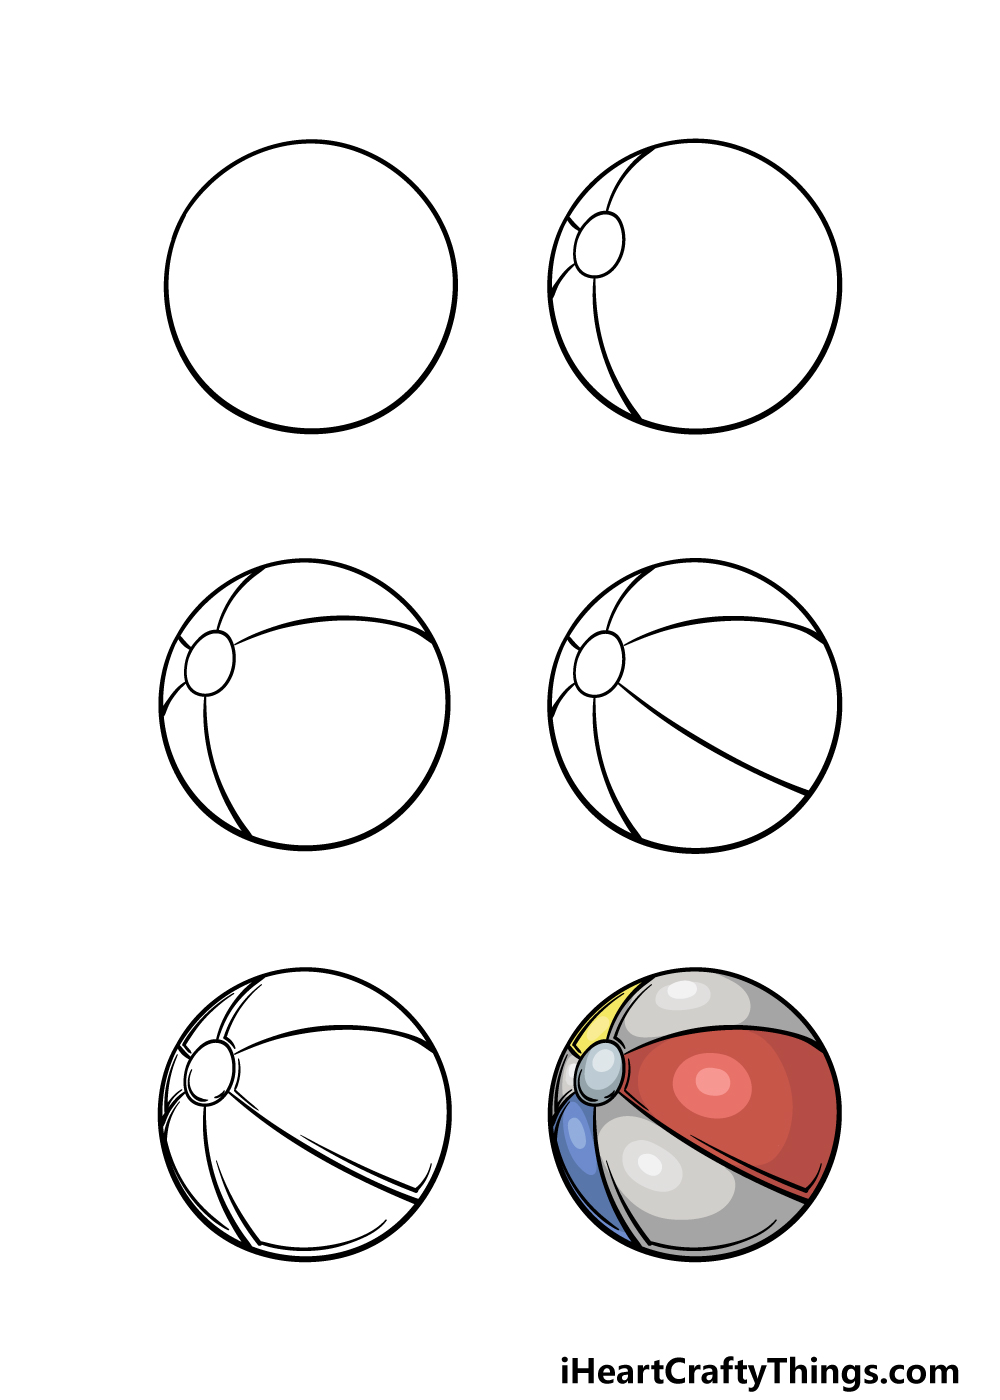 how to draw a beach ball in 6 steps